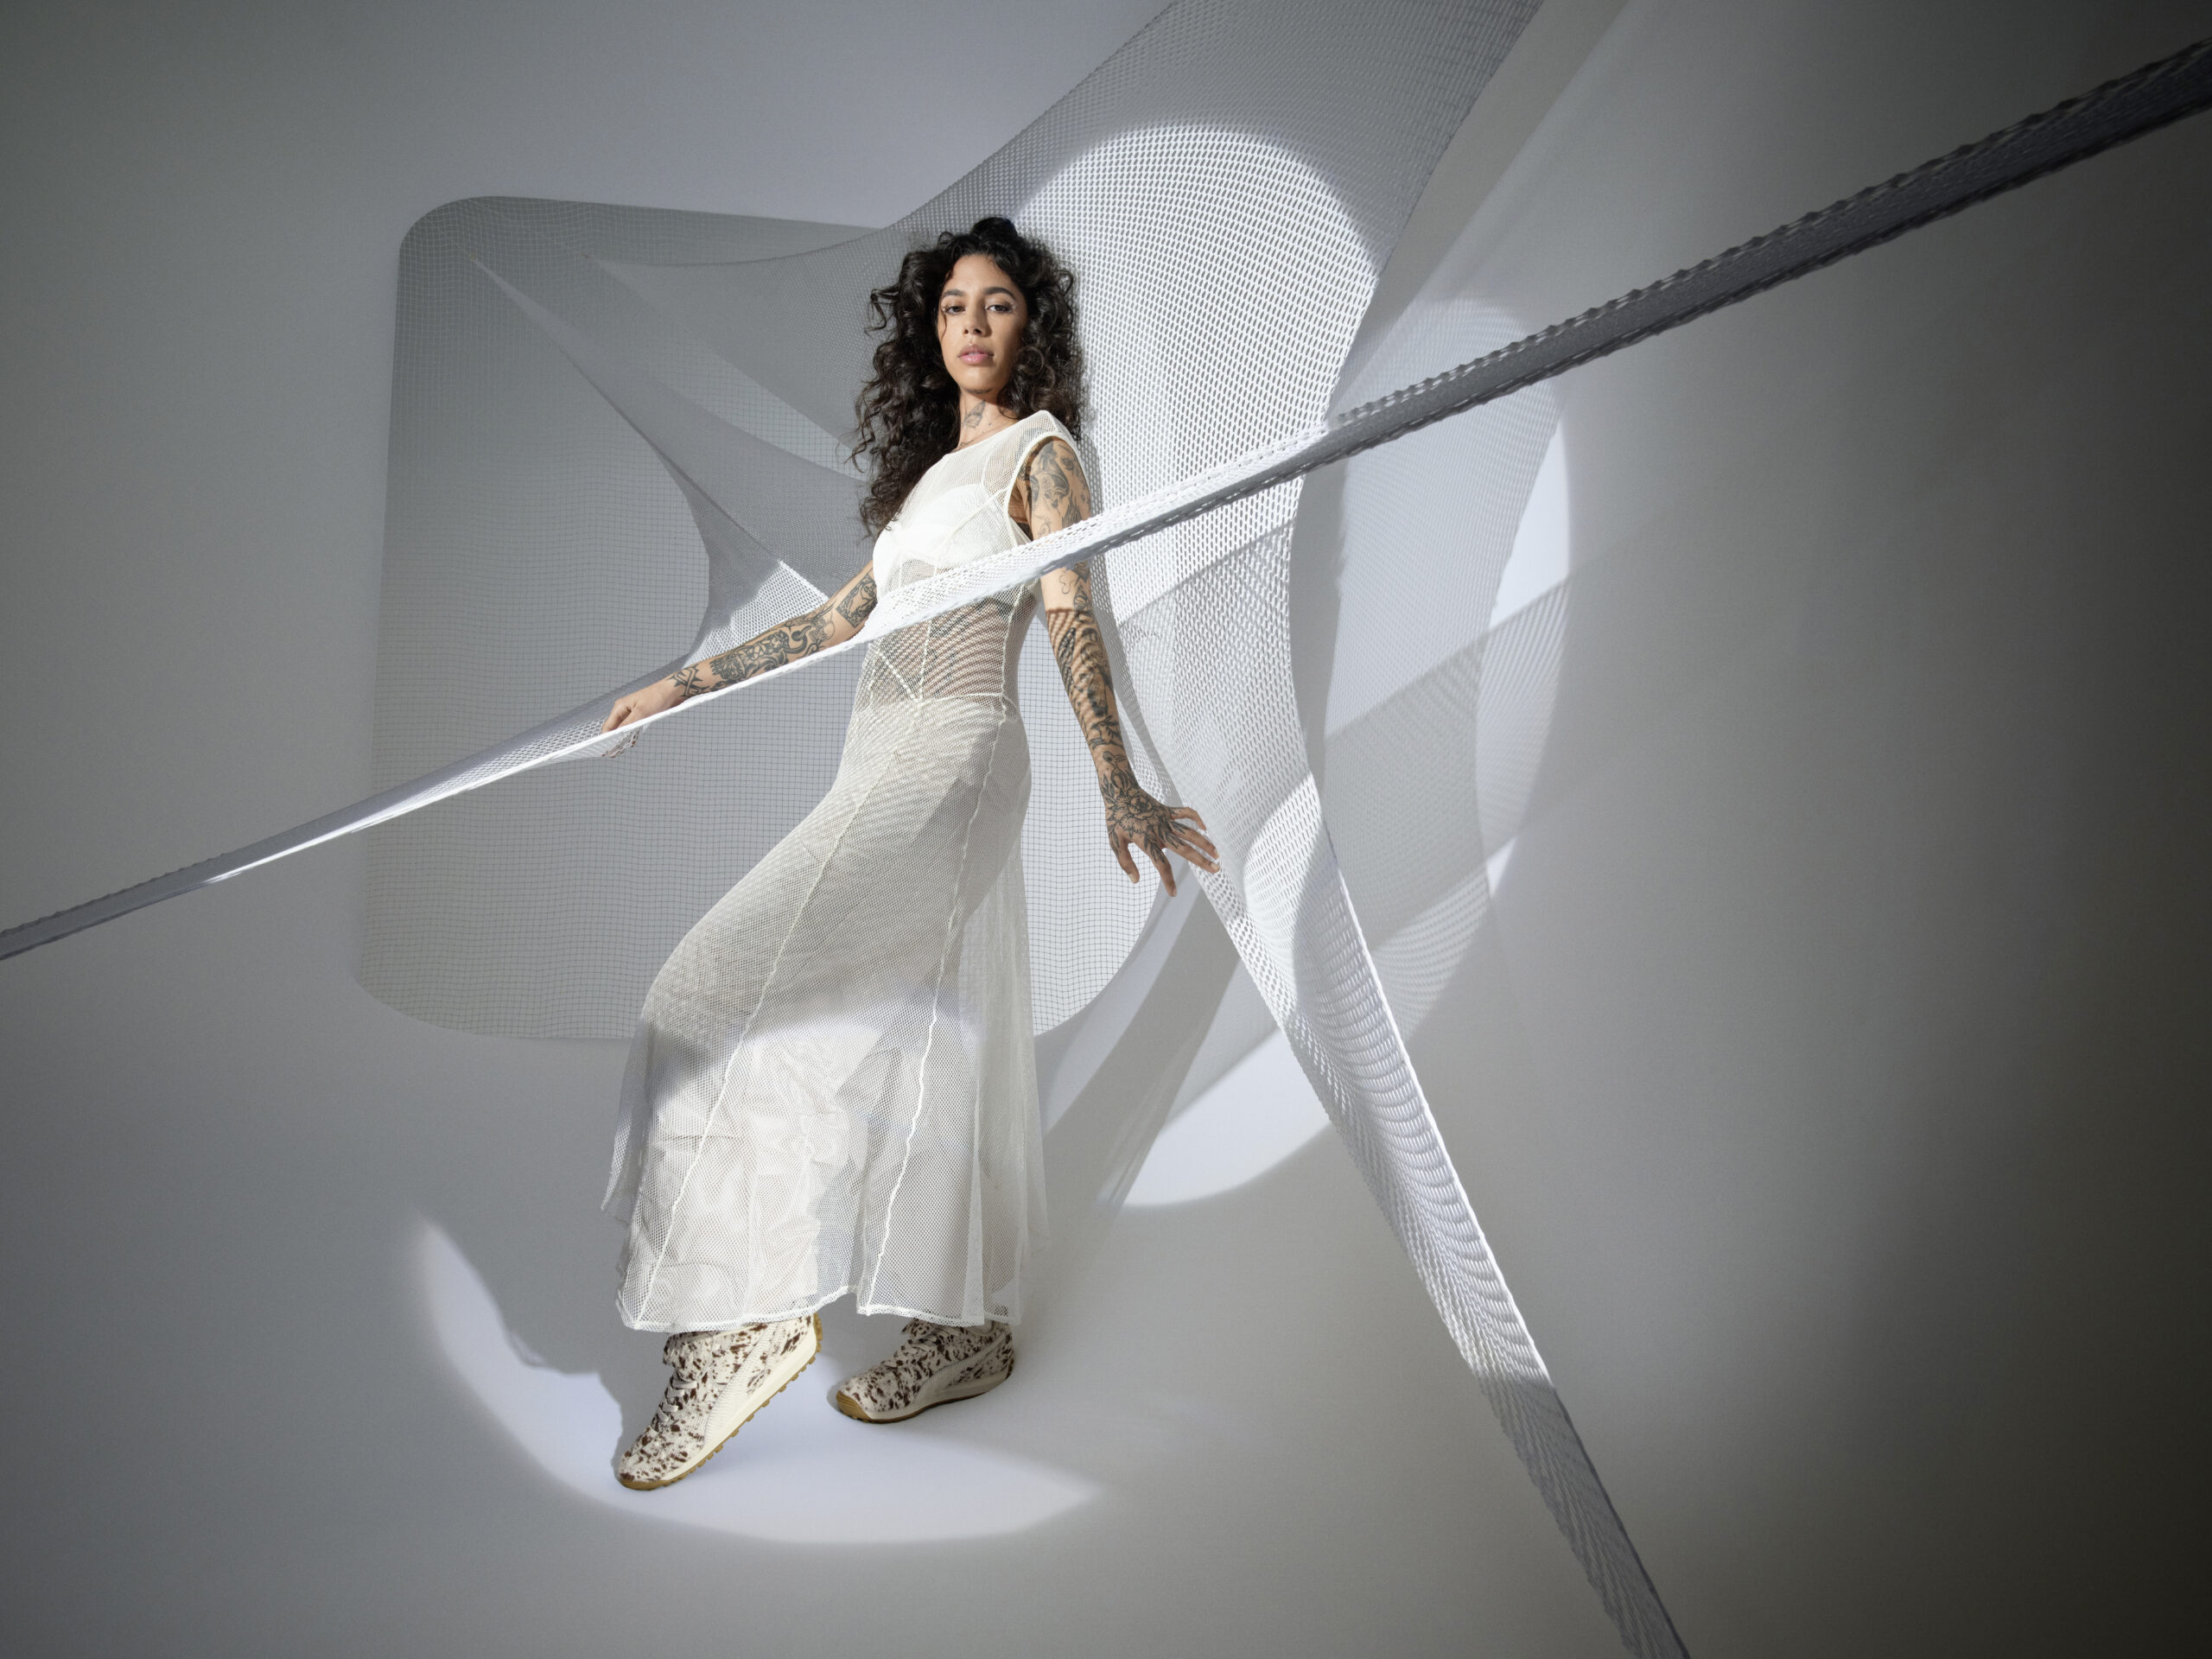 A model with elaborate tattoos on her arms poses in a flowing white dress and FENTY x PUMA Avanti Pony sneakers. The background is an abstract play of light and shadow with dynamic white ribbons crisscrossing around her, creating a sense of movement and modern elegance.